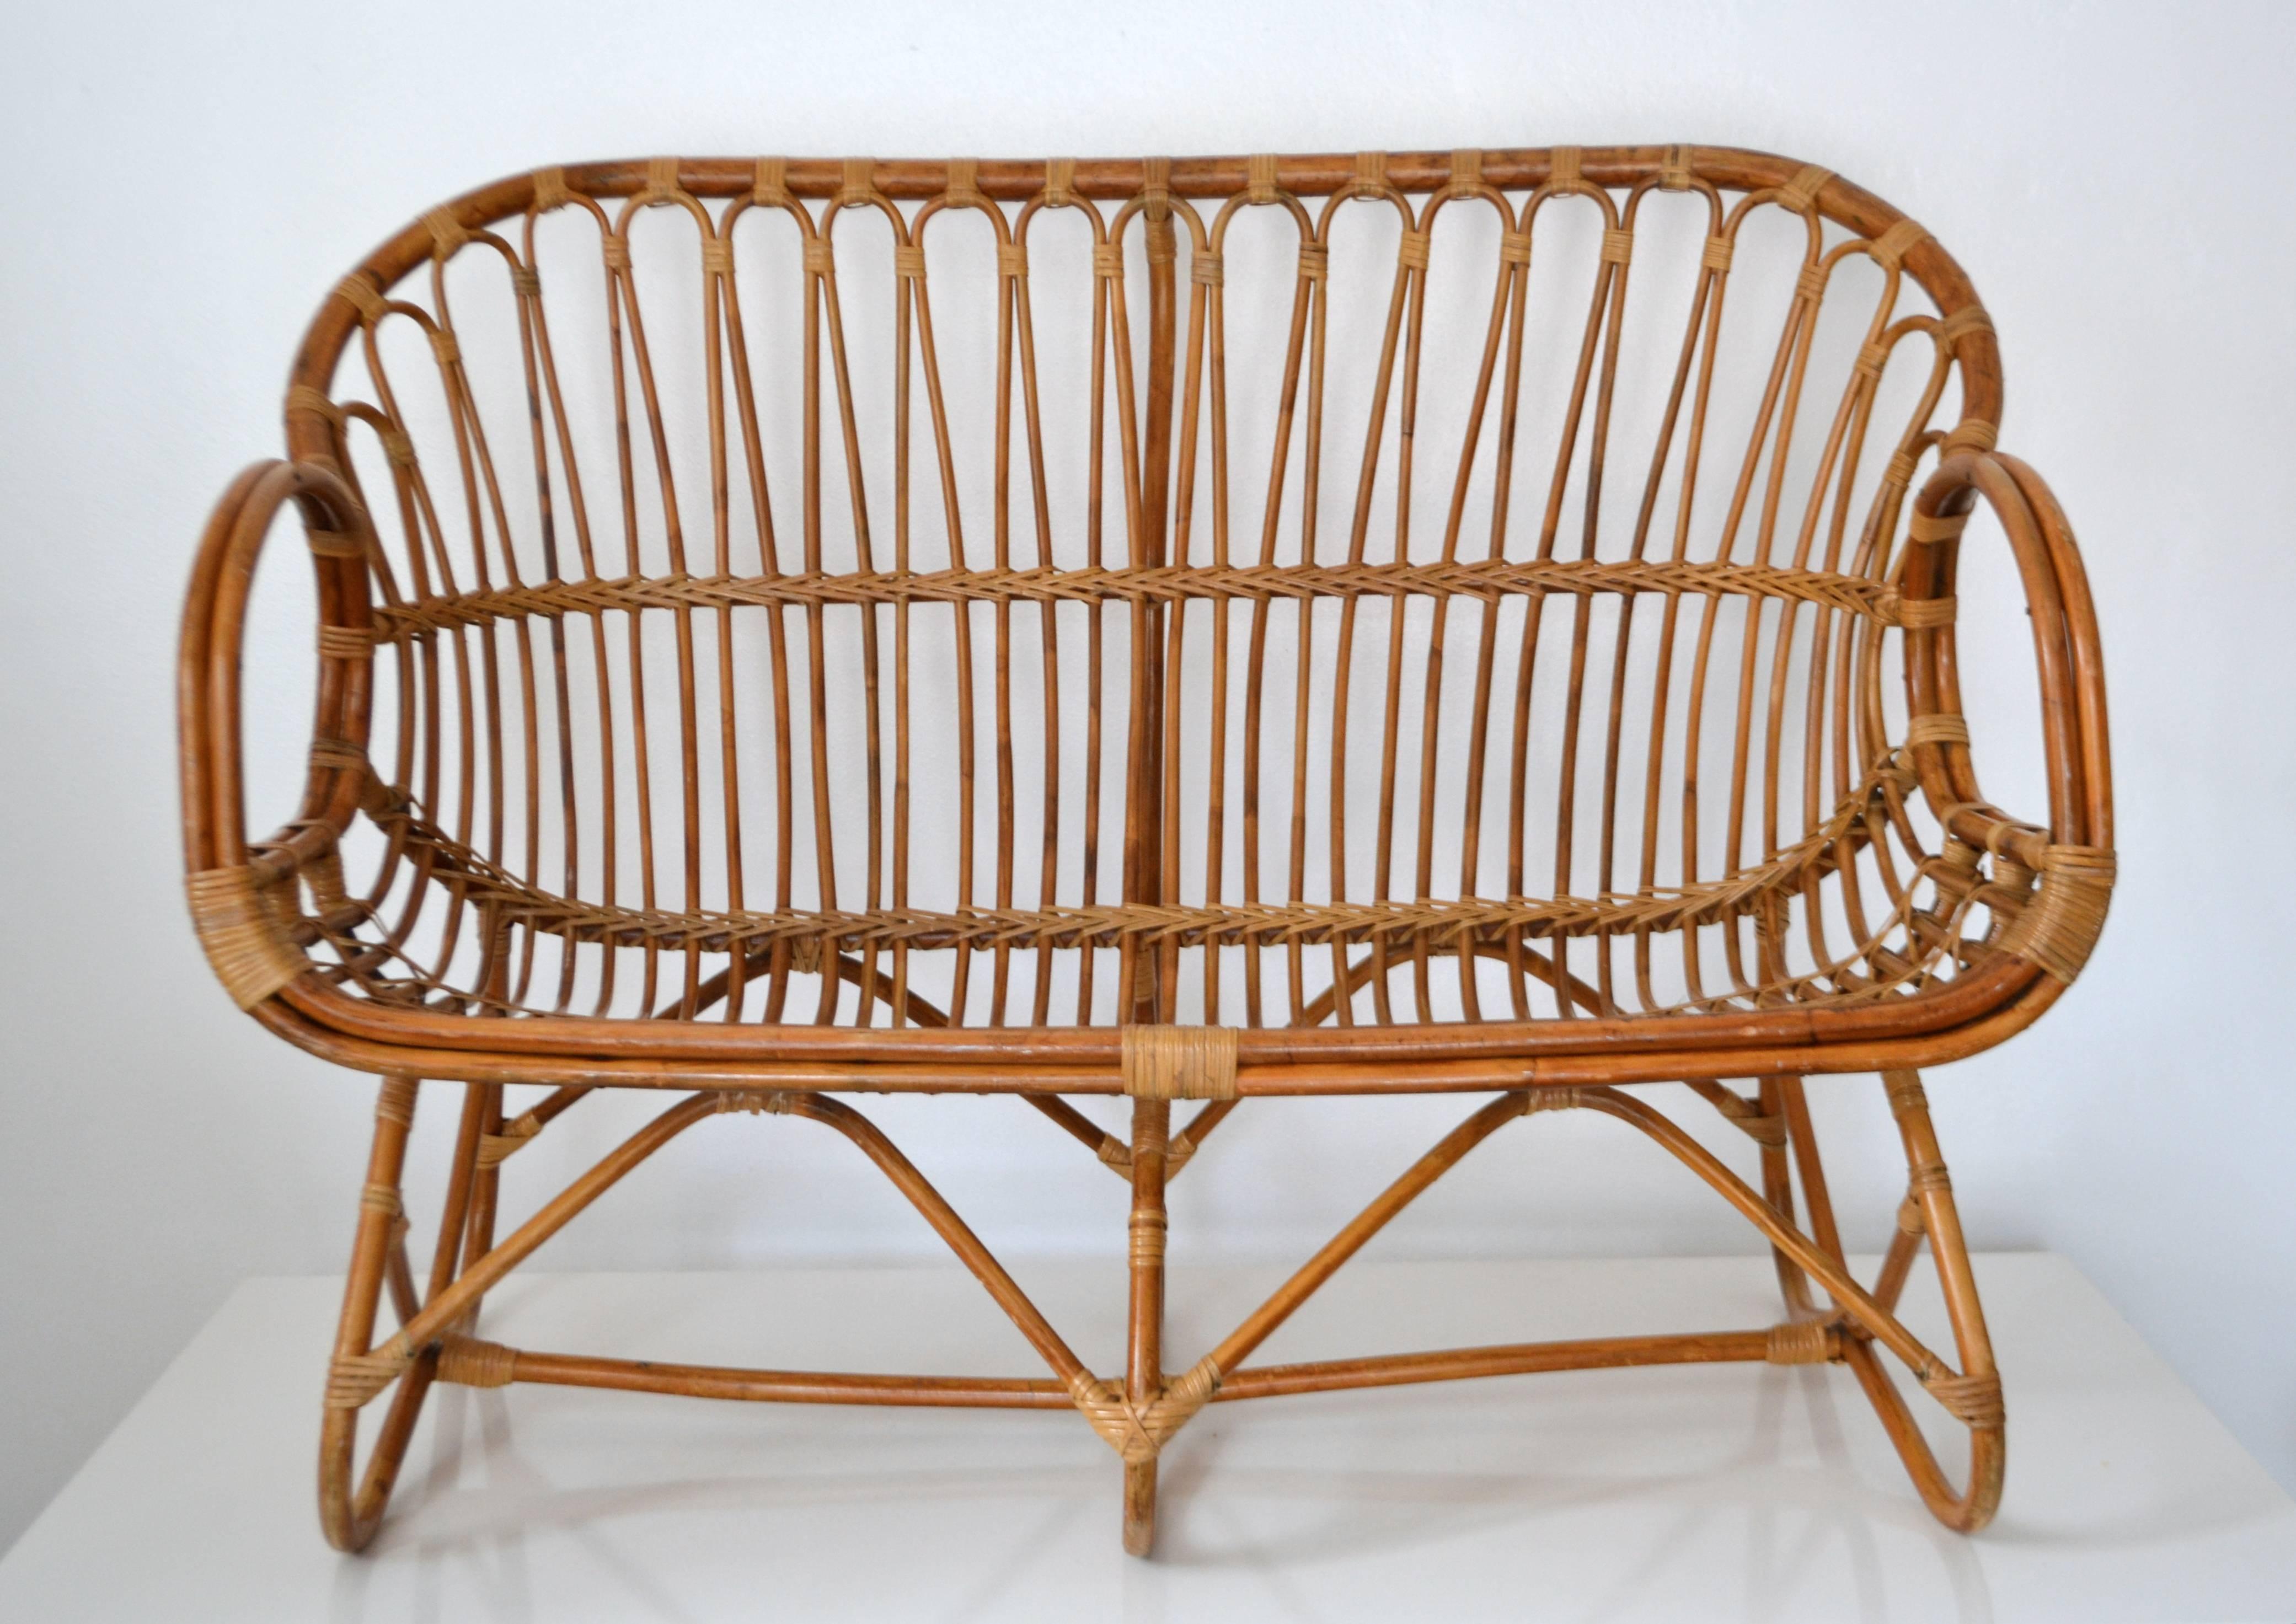 Striking midcentury bamboo settee, circa 1960s. This sculptural artisan crafted love seat is designed of bent bamboo with cane accents.